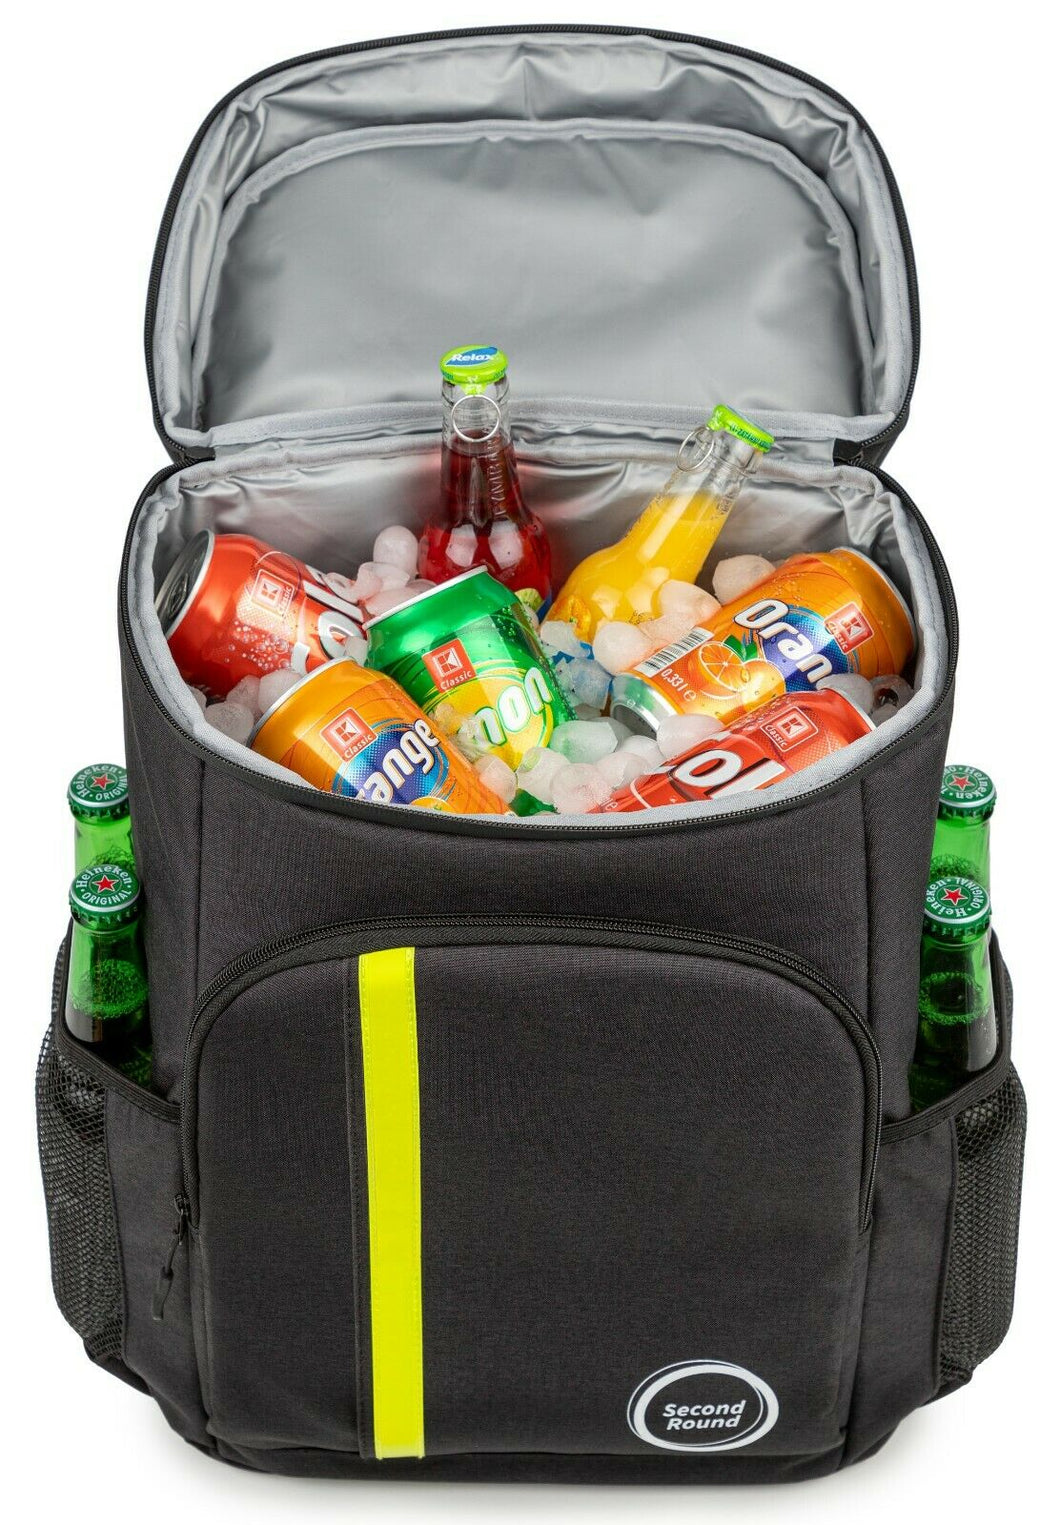 Large Insulated Cooler Ice Chest Backpack